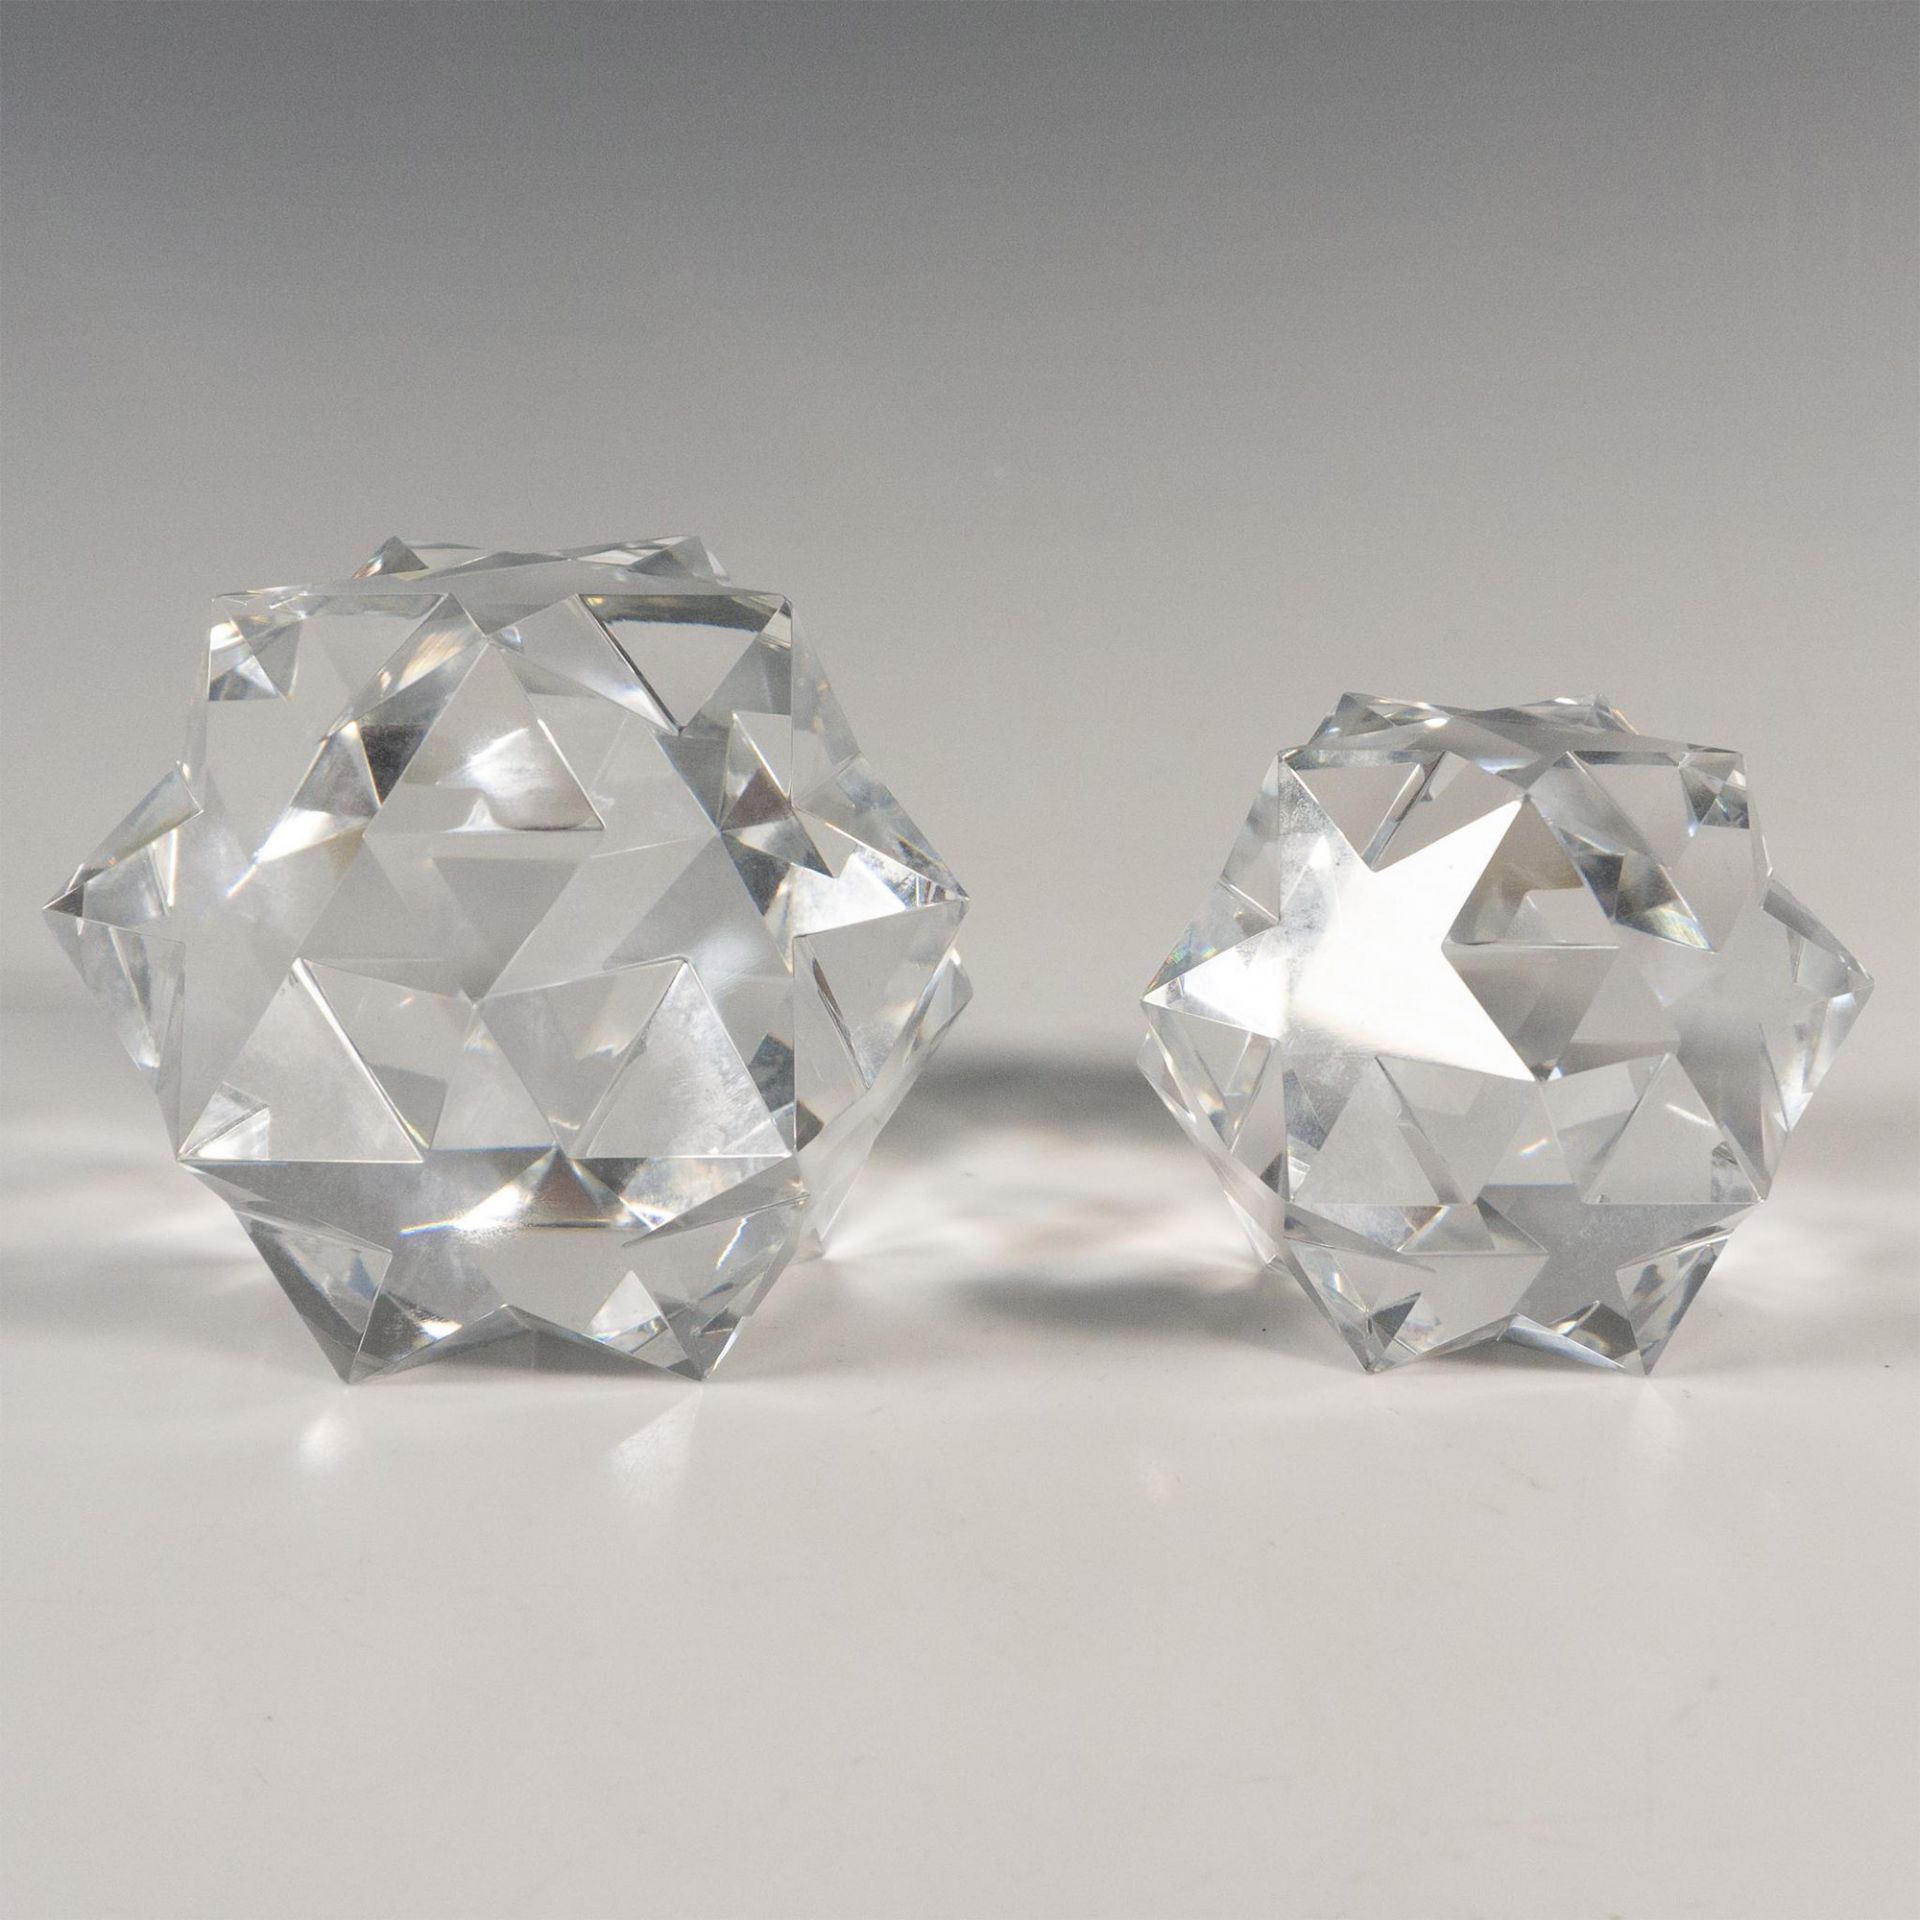 Pair of Star Dodecahedron Paperweights - Image 2 of 3